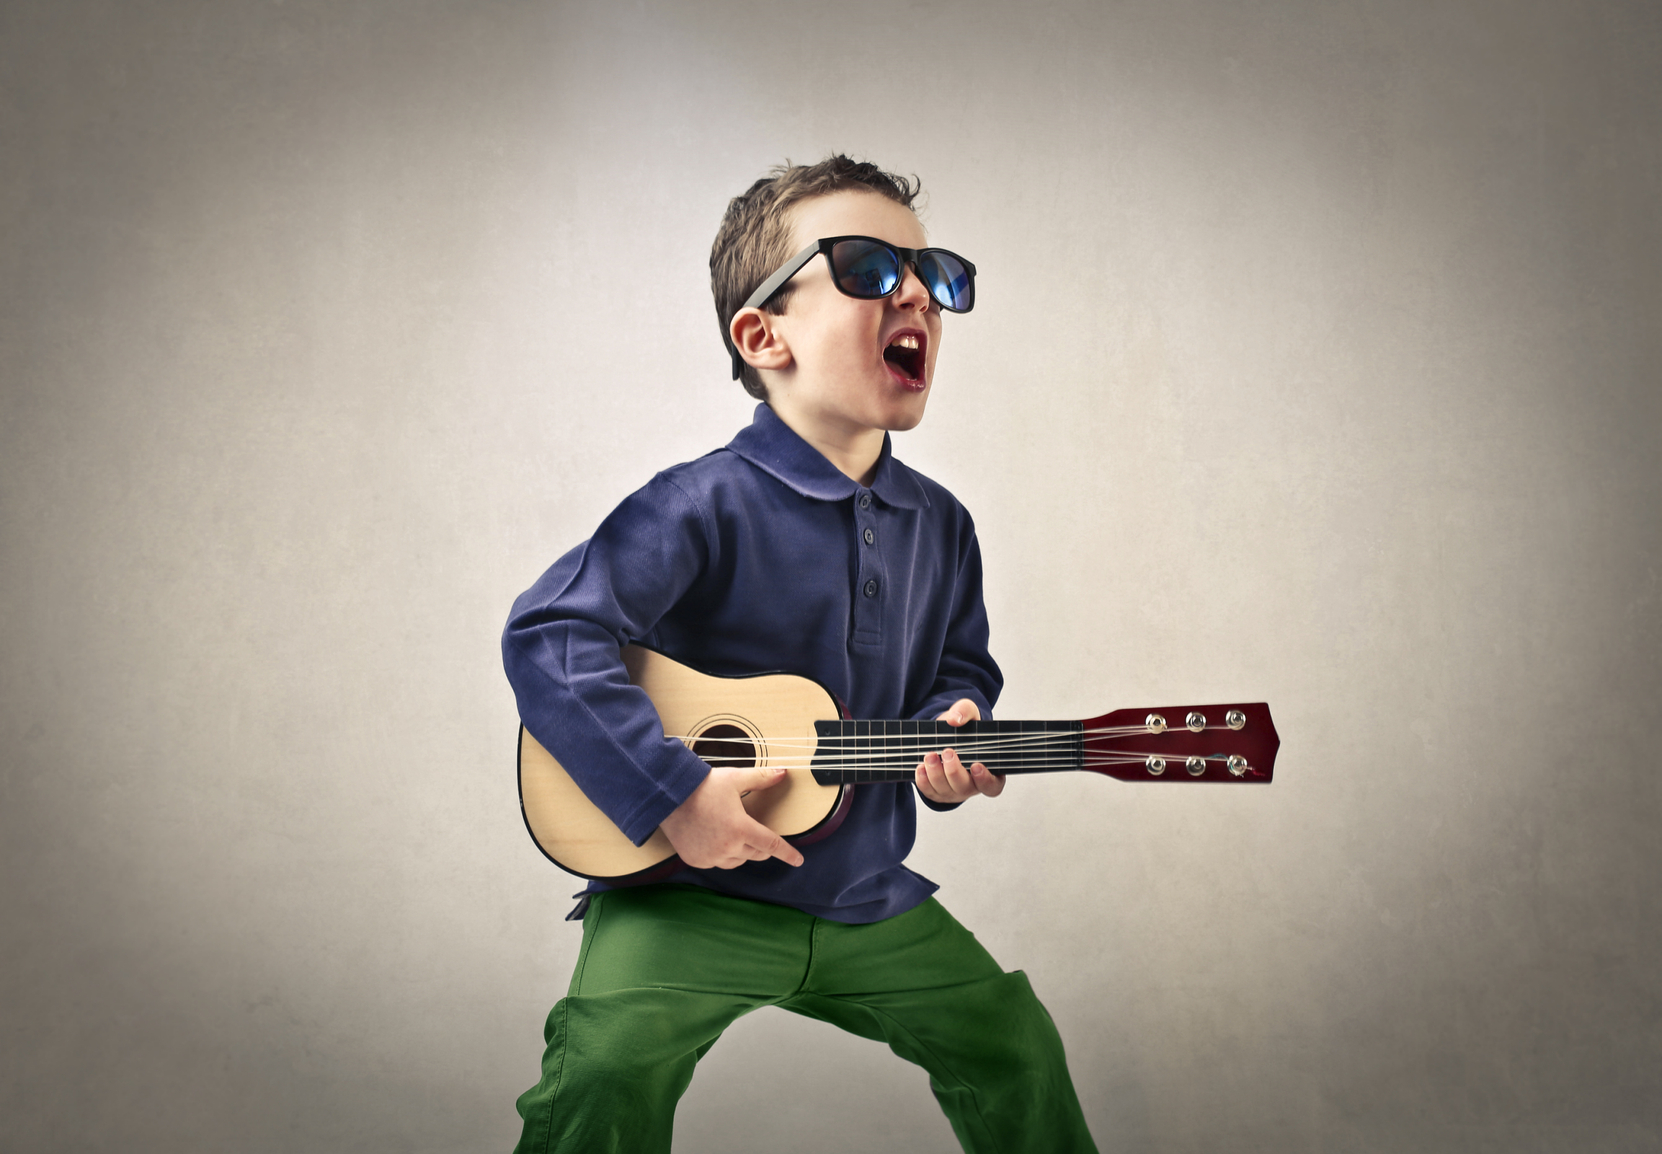 A kid singing enthusiastically with his little guitar